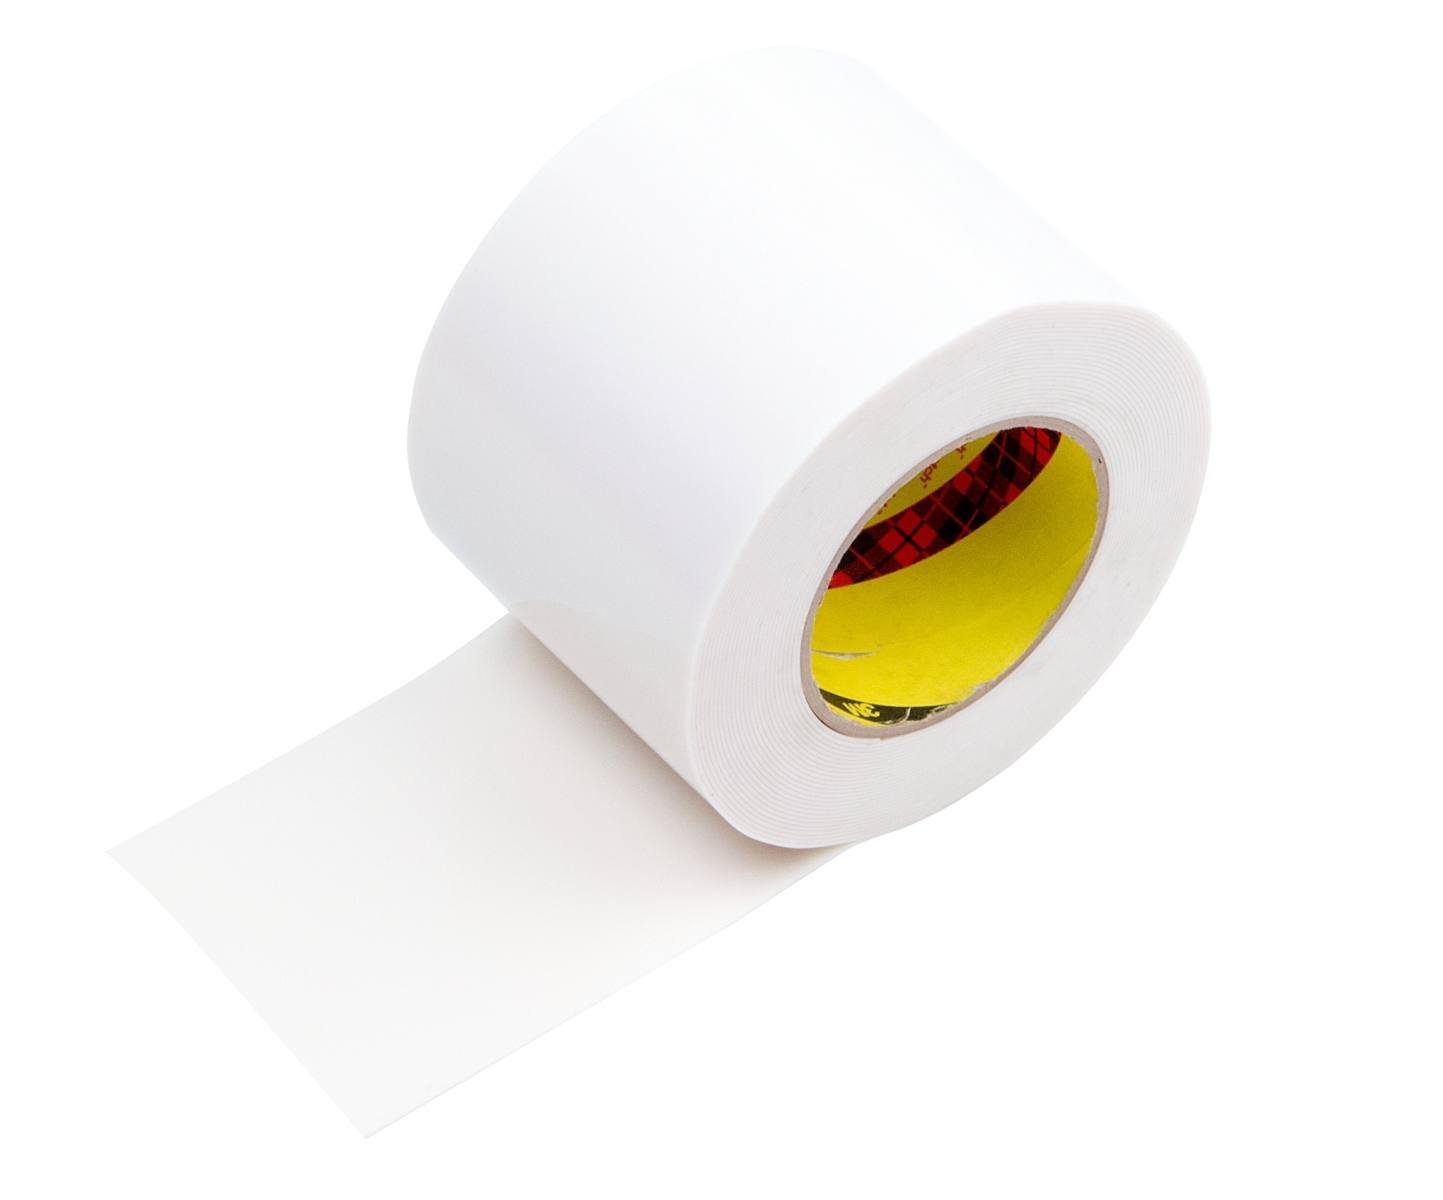 3M Thermally conductive adhesive film 8926-05 25 mm x 40 m, 0.500 mm